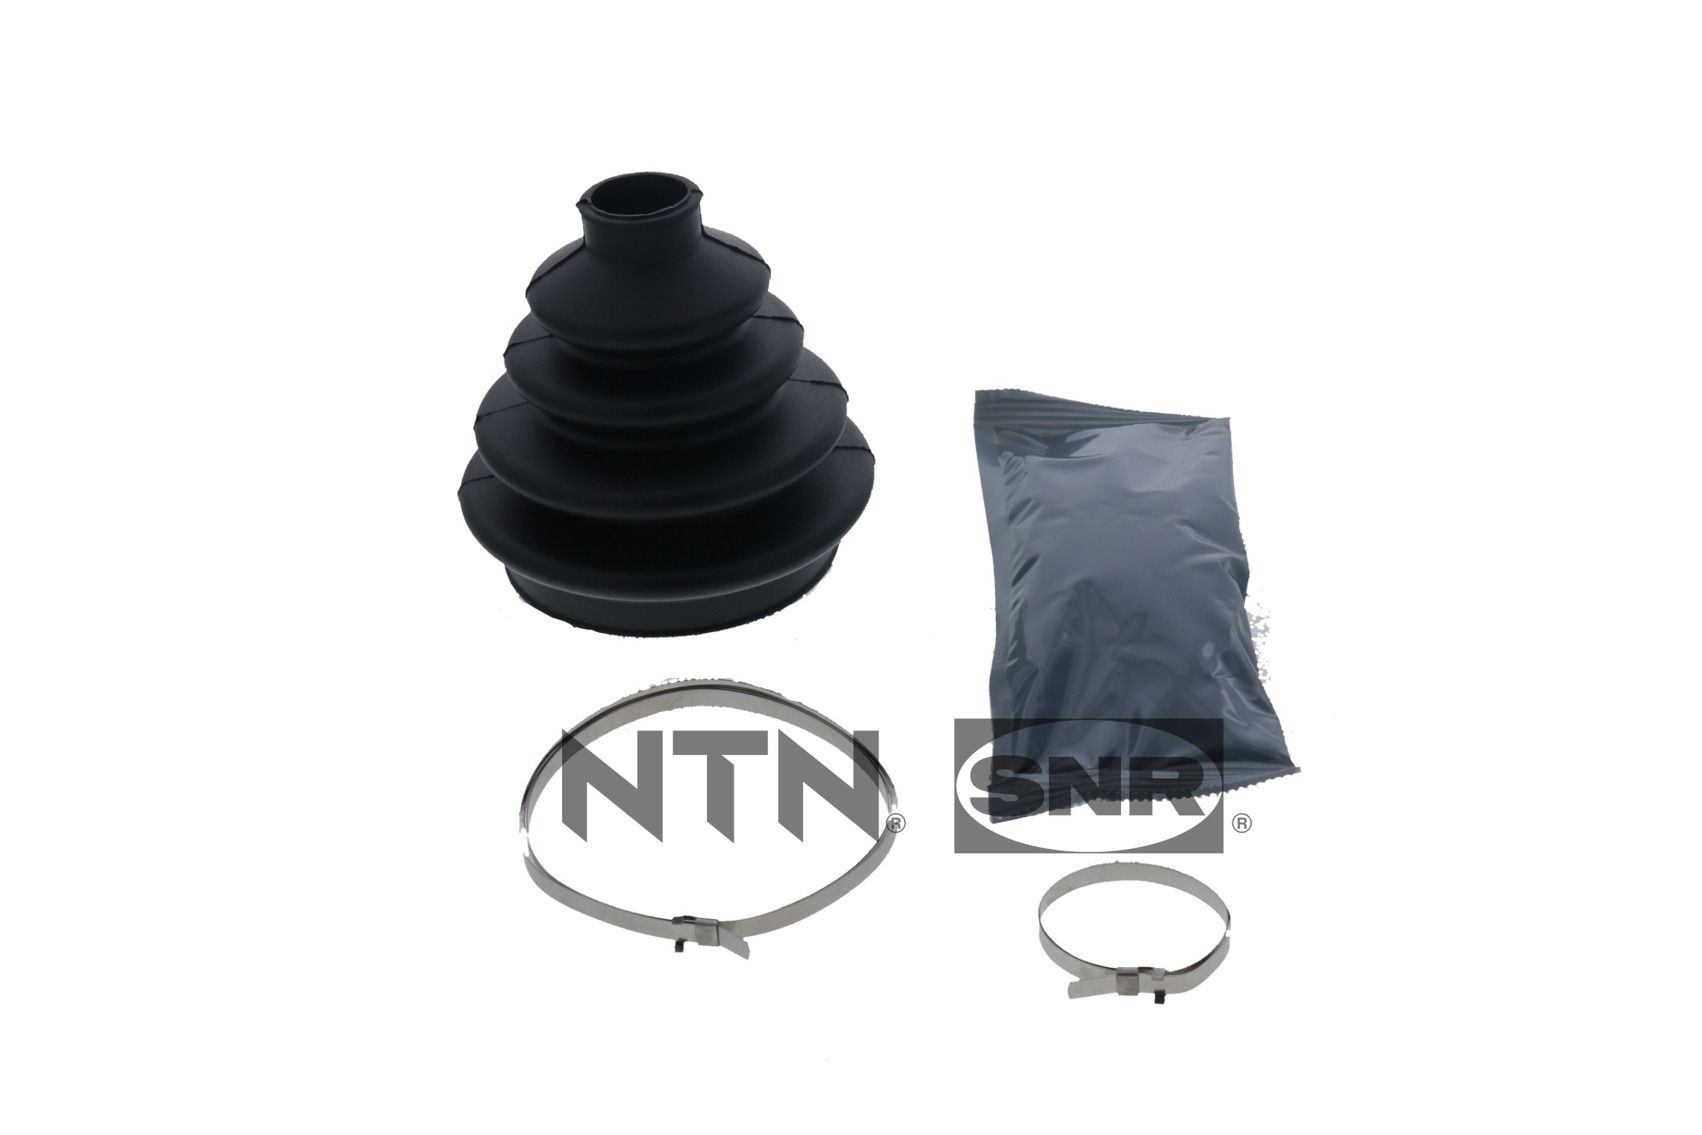 Renault GRAND SCÉNIC Drive shaft and cv joint parts - Bellow Set, drive shaft SNR OBK10.005